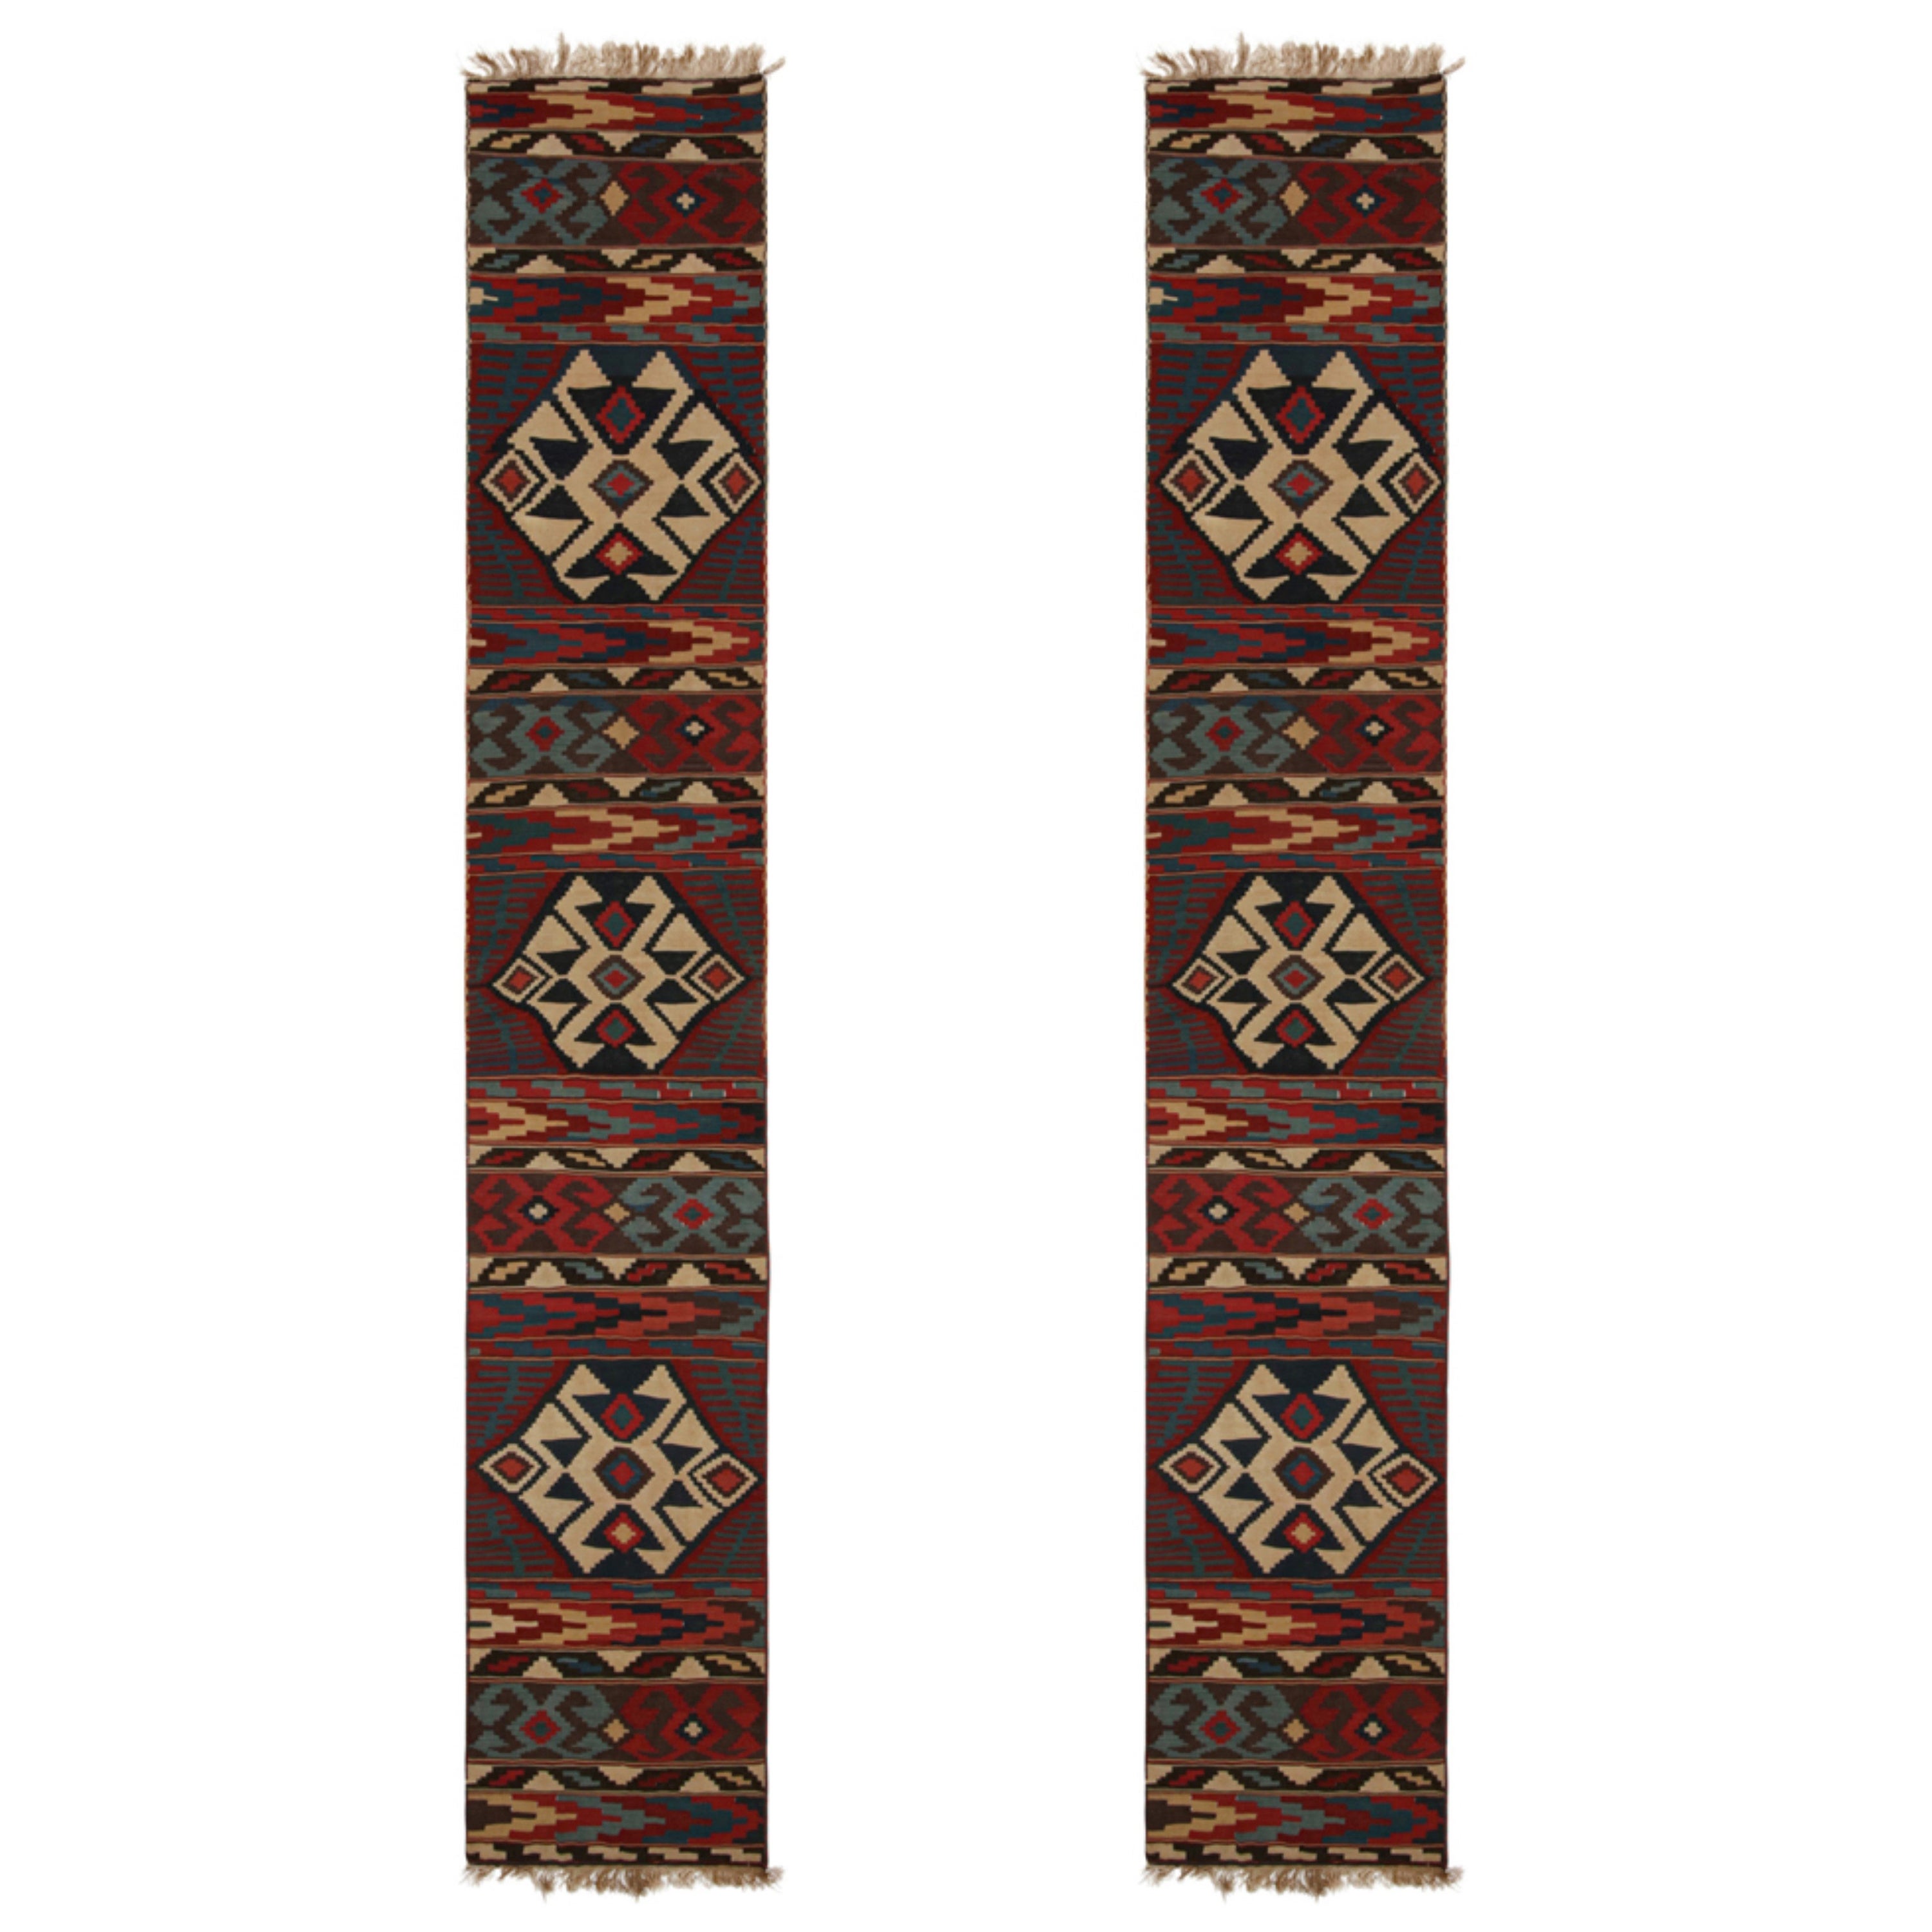 Twin Vintage Persian Kilim Runner Rugs with Geometric Patterns